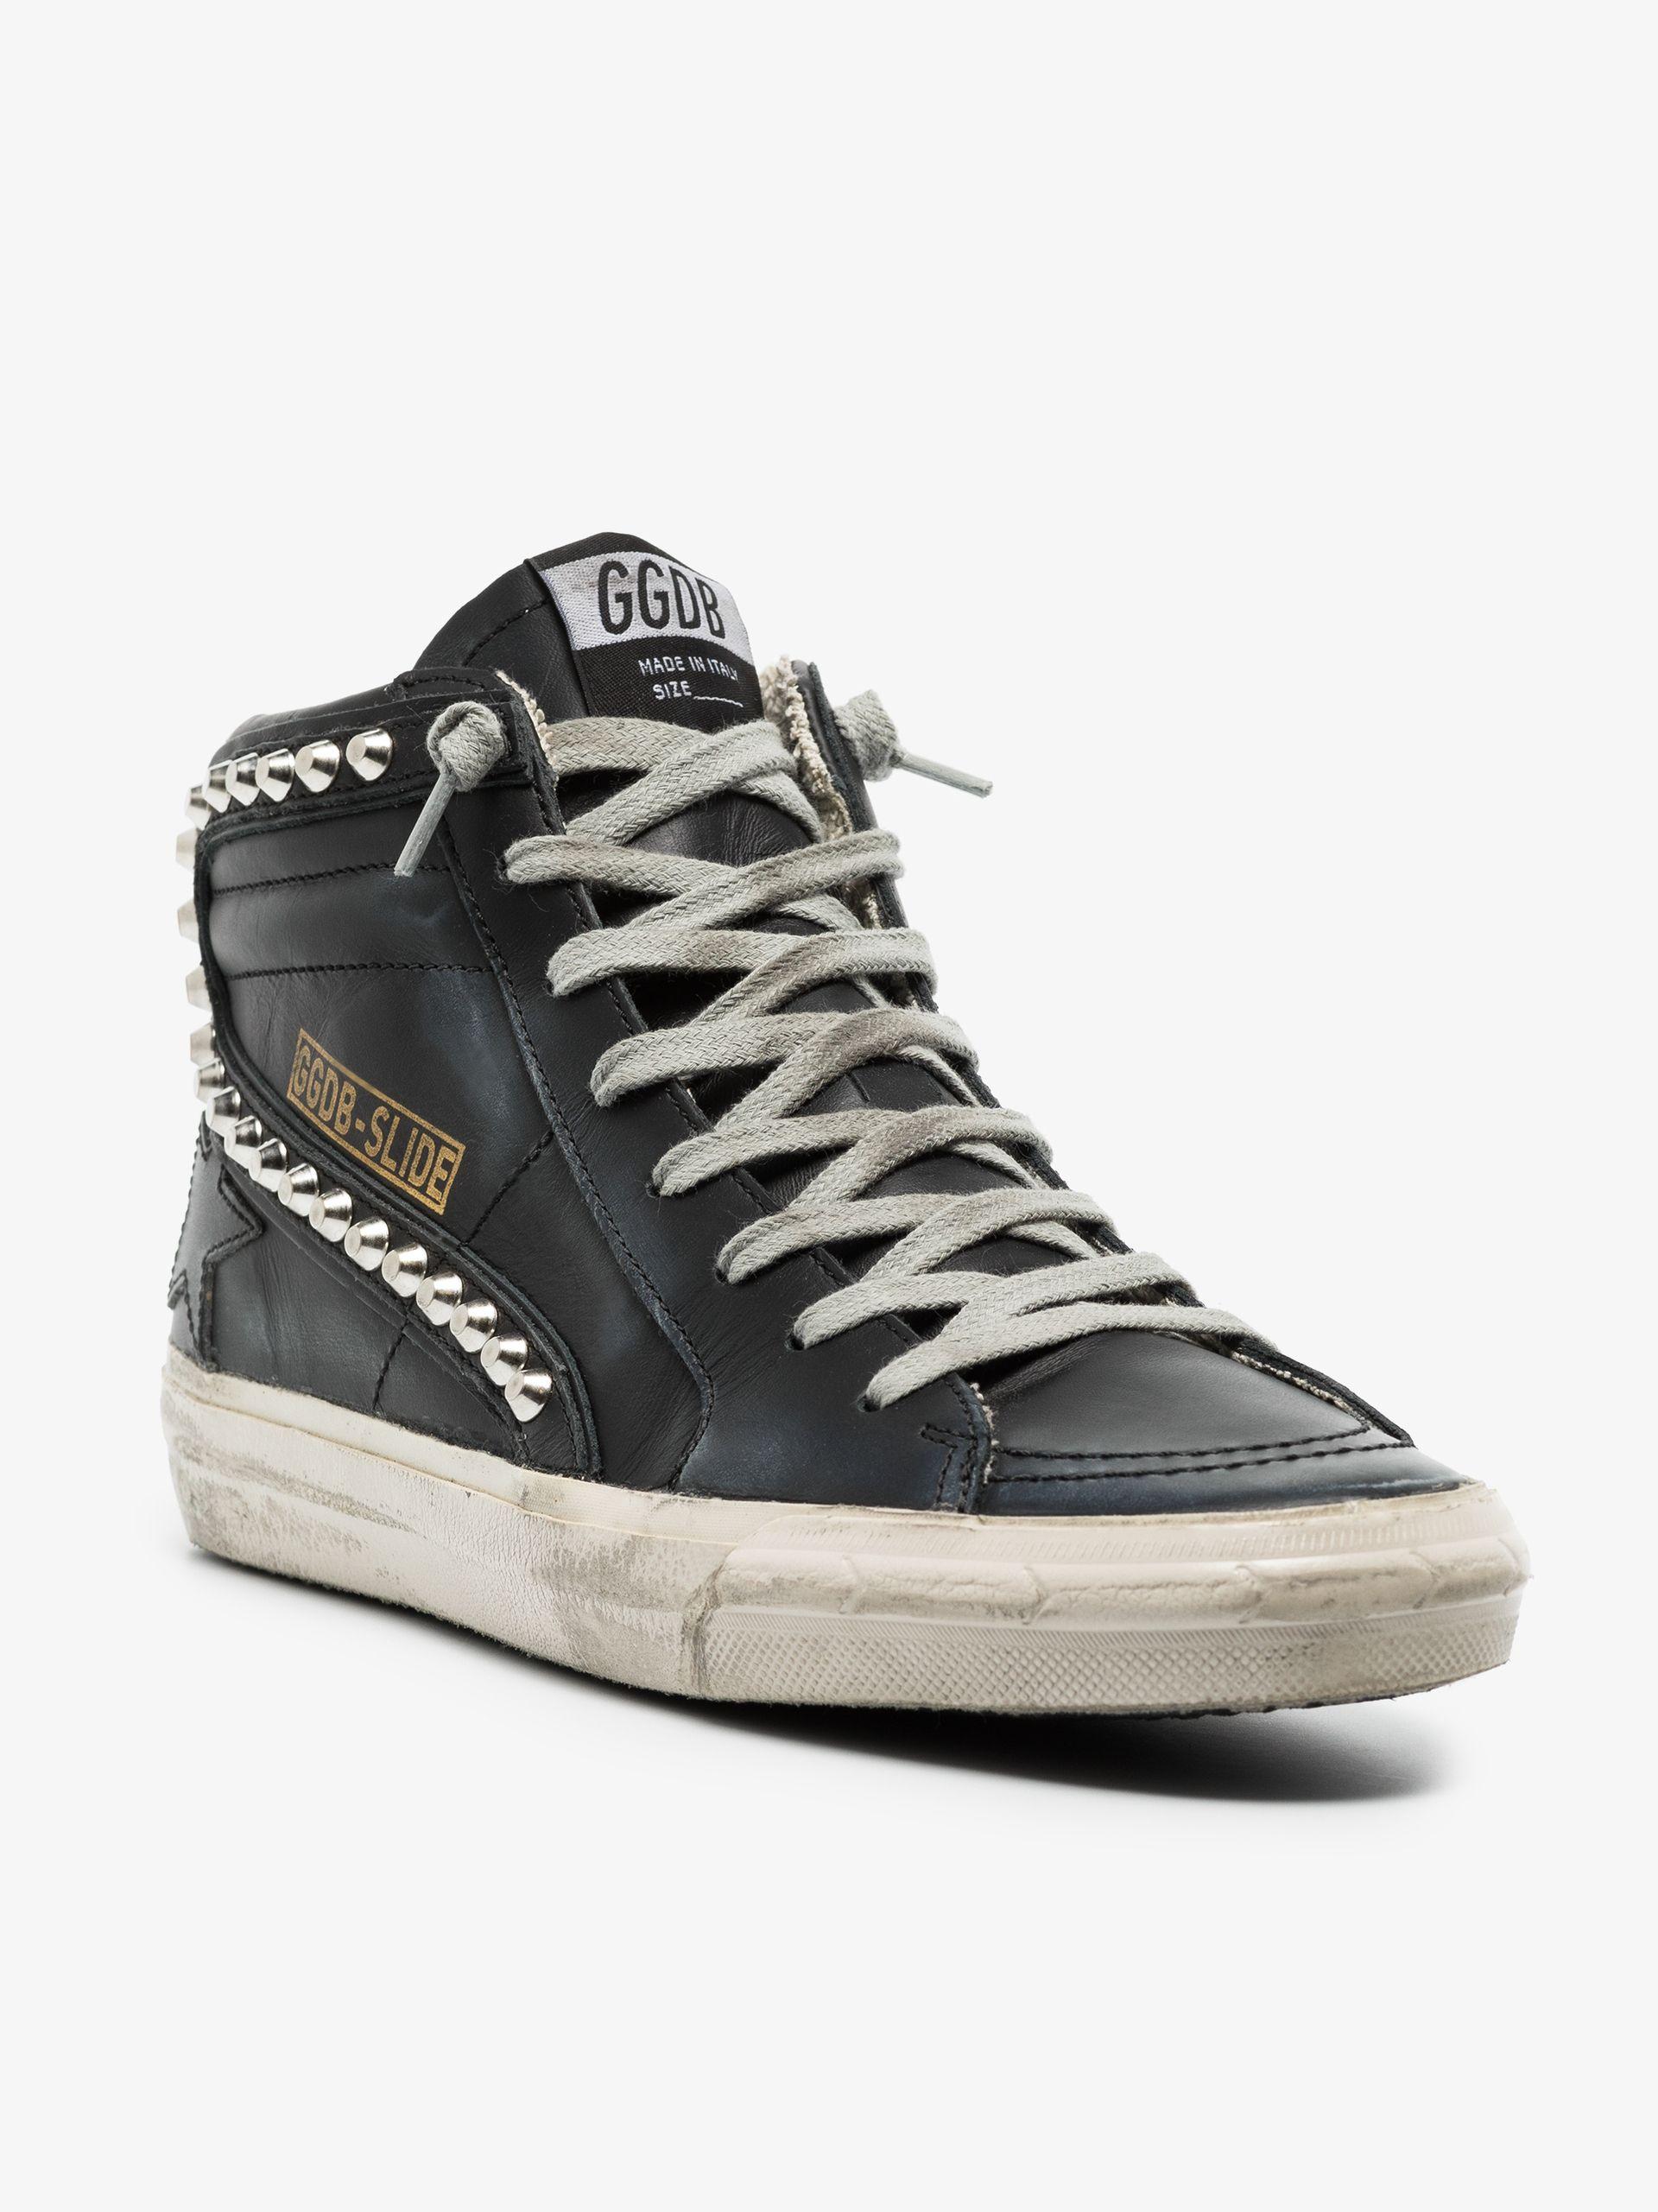 GOLDEN GOOSE Slide sneakers Black leather with metal studded-